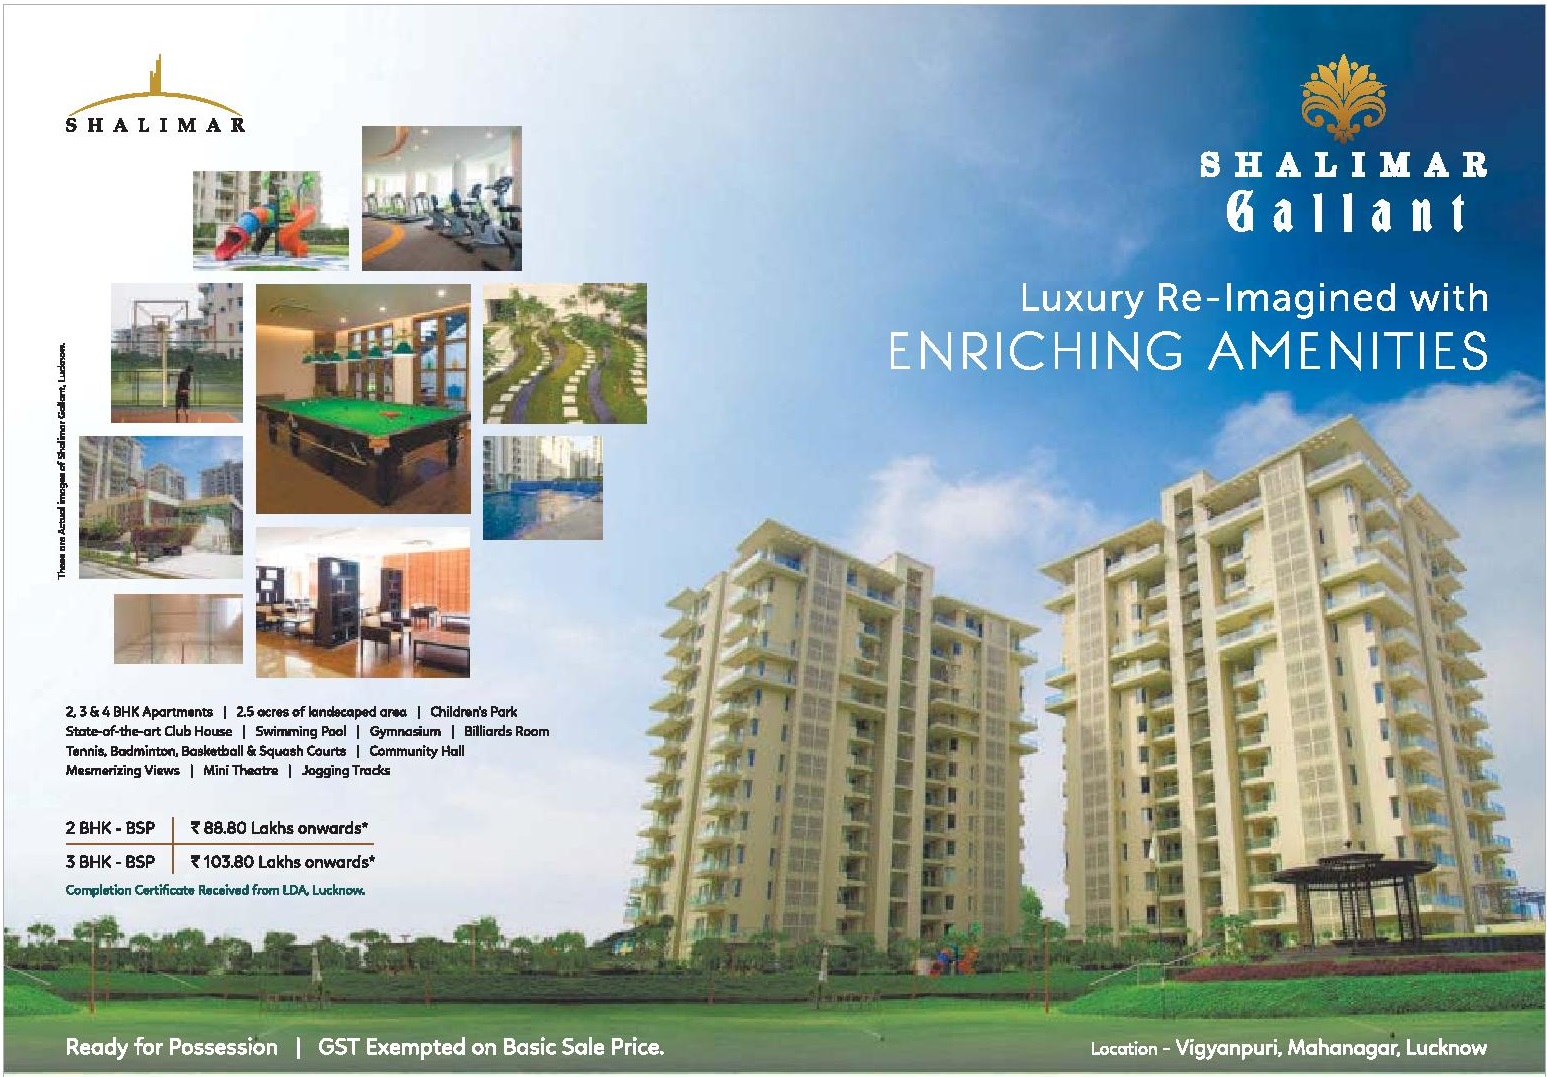 Launching luxury re-imagined with enriching amenities at Shalimar Gallant in Lucknow Update